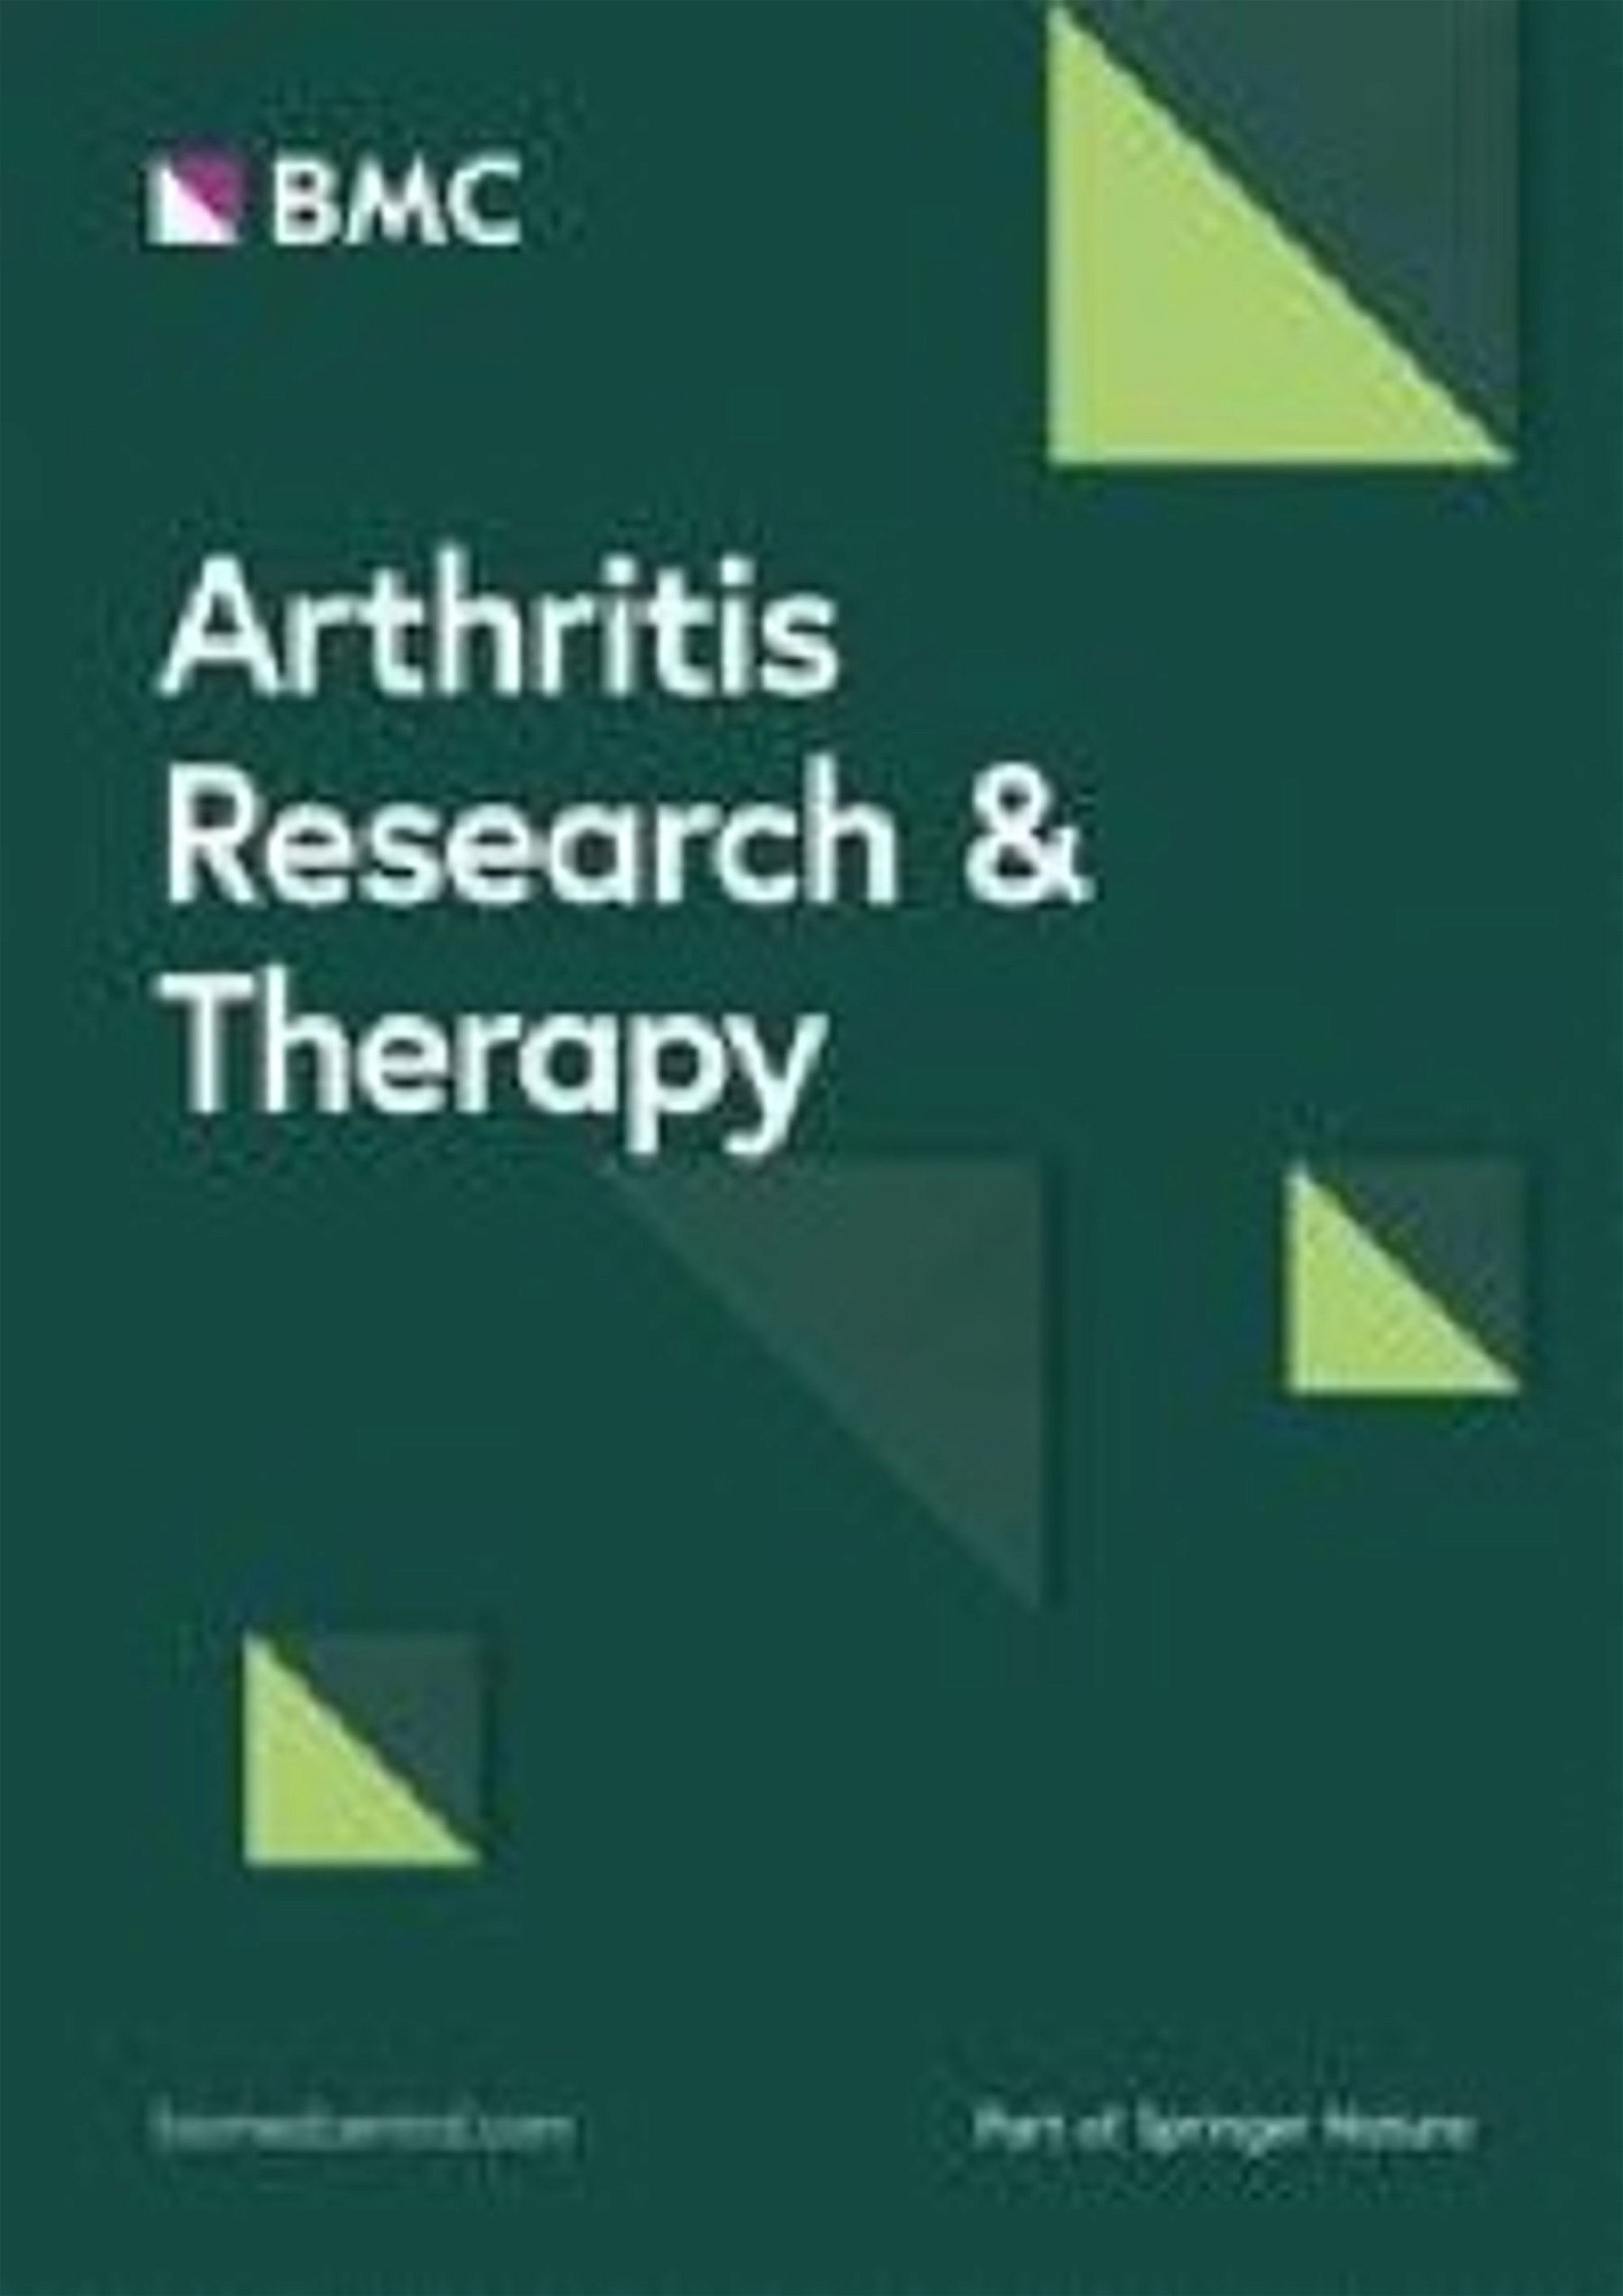 Mobile App-based documentation of patient-reported outcomes - 3-months results from a proof-of-concept study on modern rheumatology patient management - Arthritis Research & Therapy